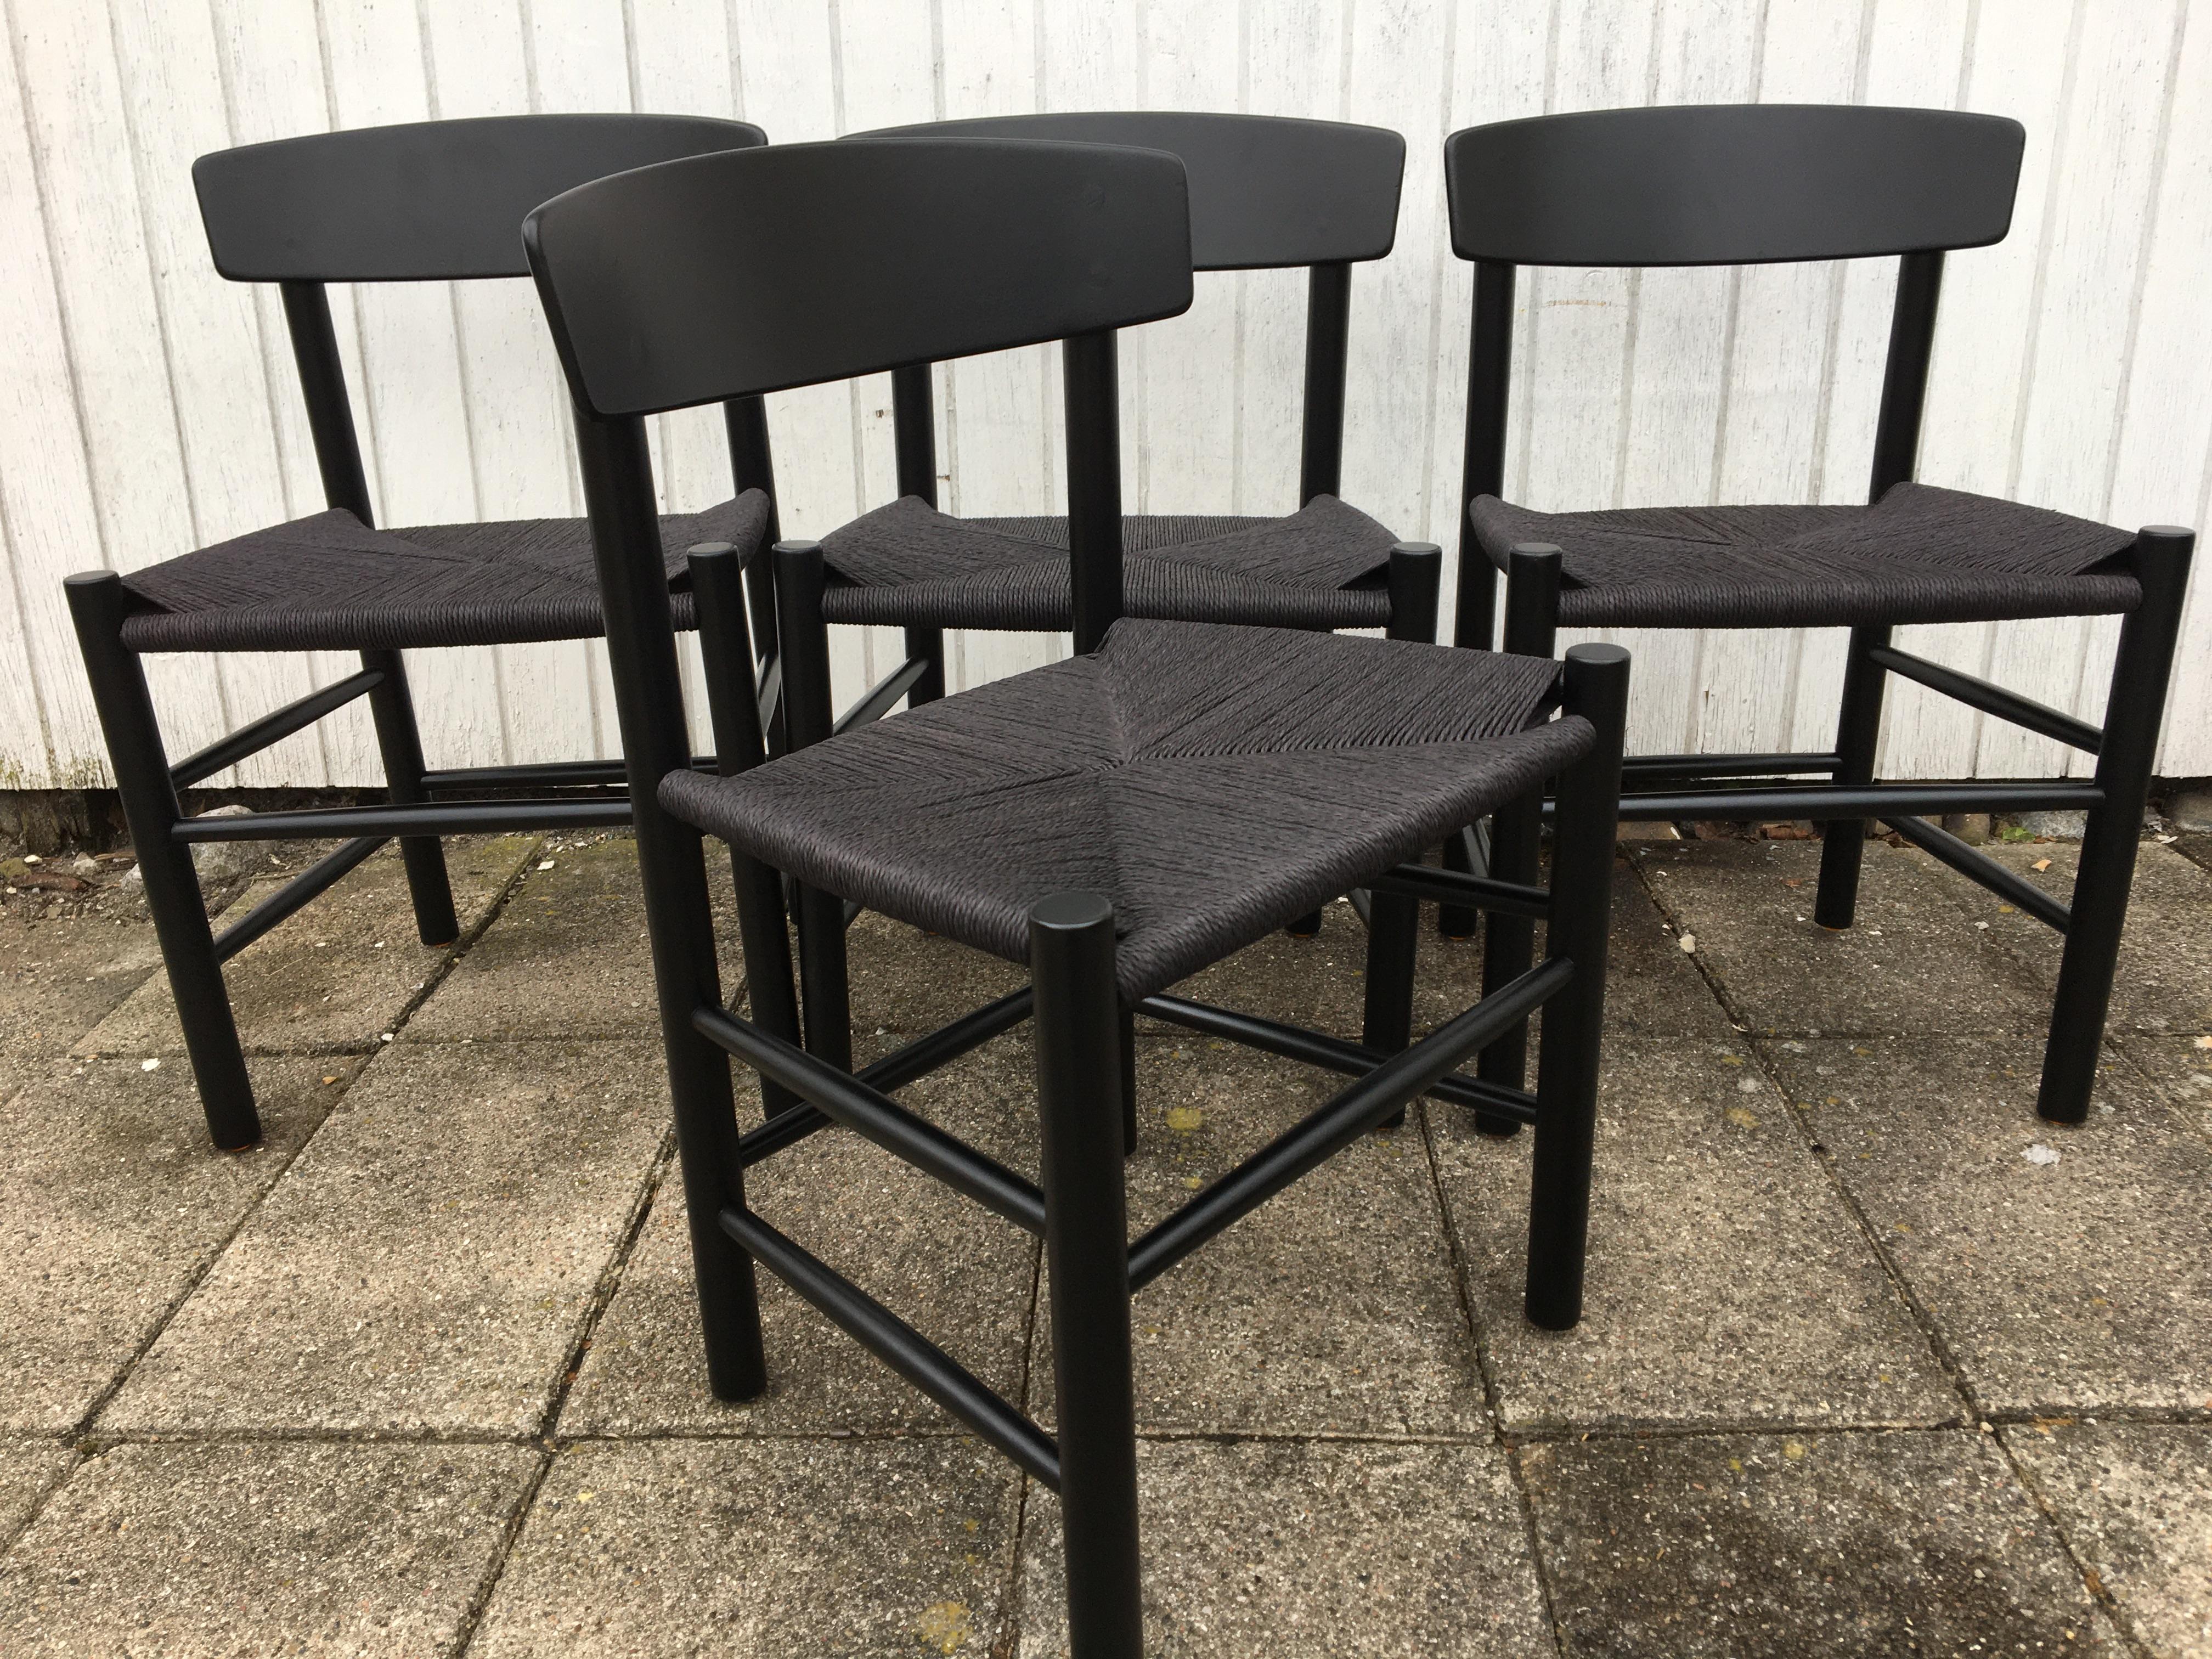 Set of 4 Børge Mogensen 'Folkestol' J39 black varnished and upholstered with new black paper cord.
The chairs are in good condition with new furniture shoes.